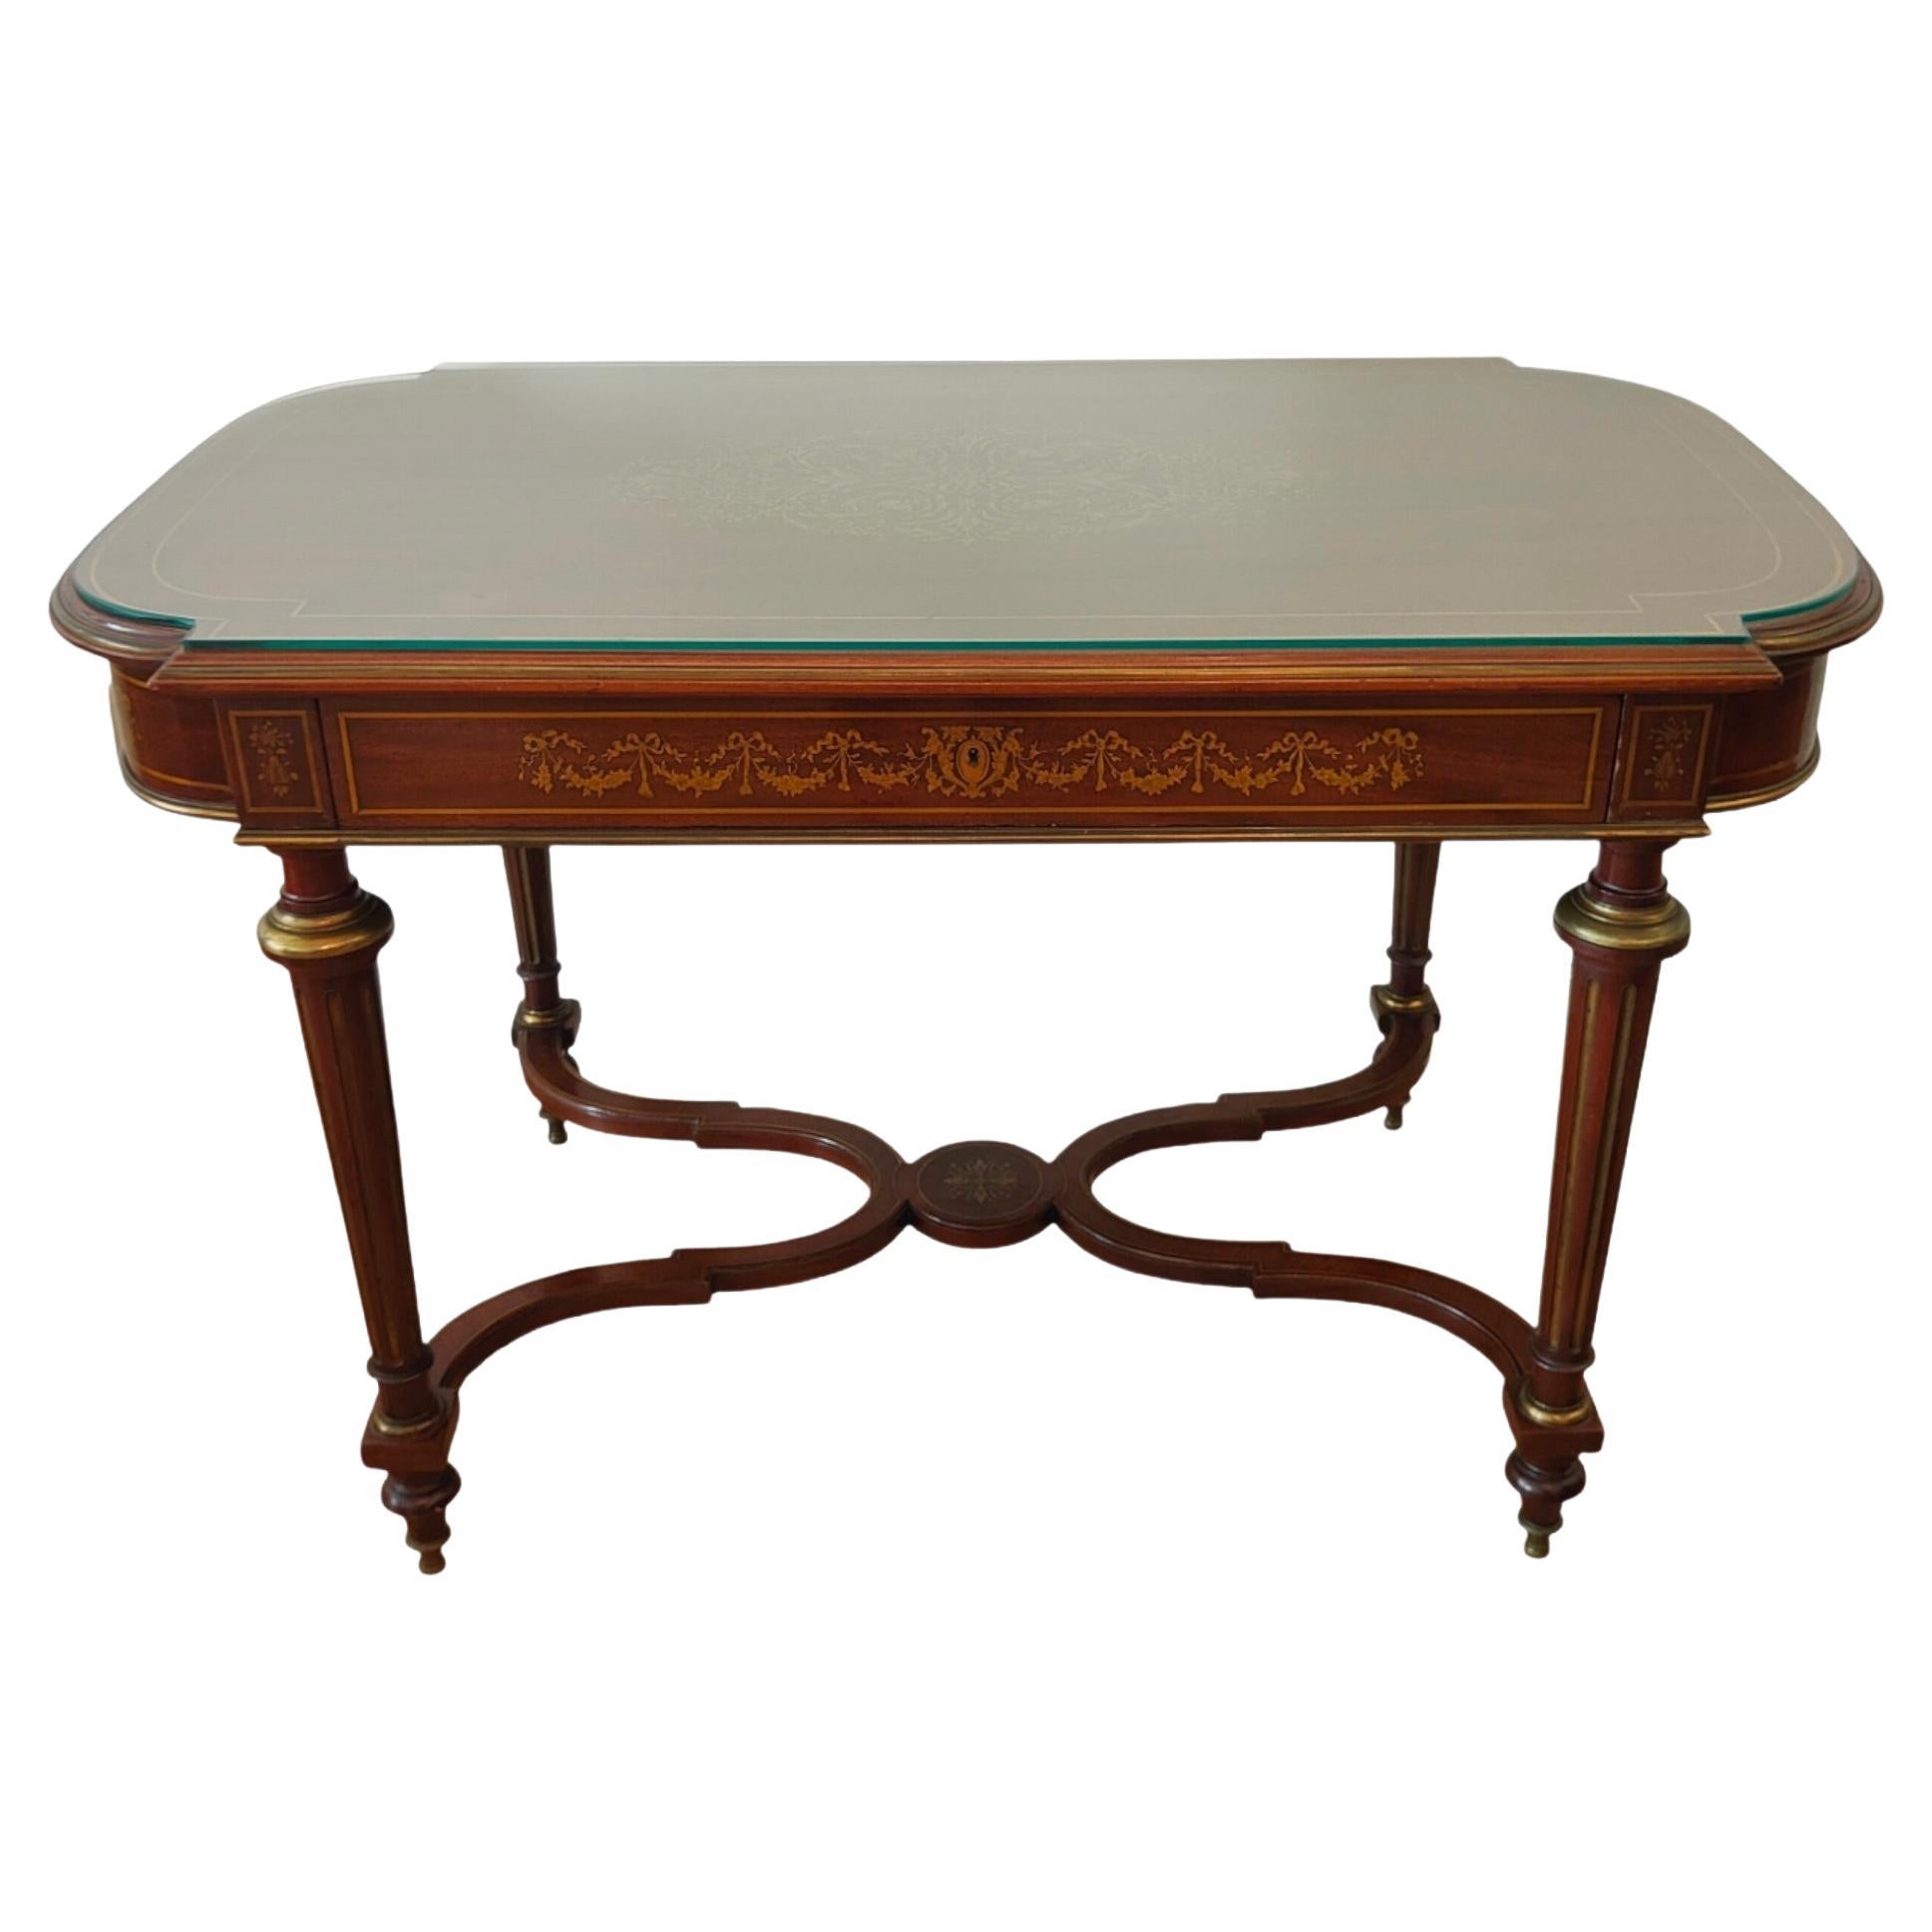 Elegant French Table with Marquetry from the 19th Century